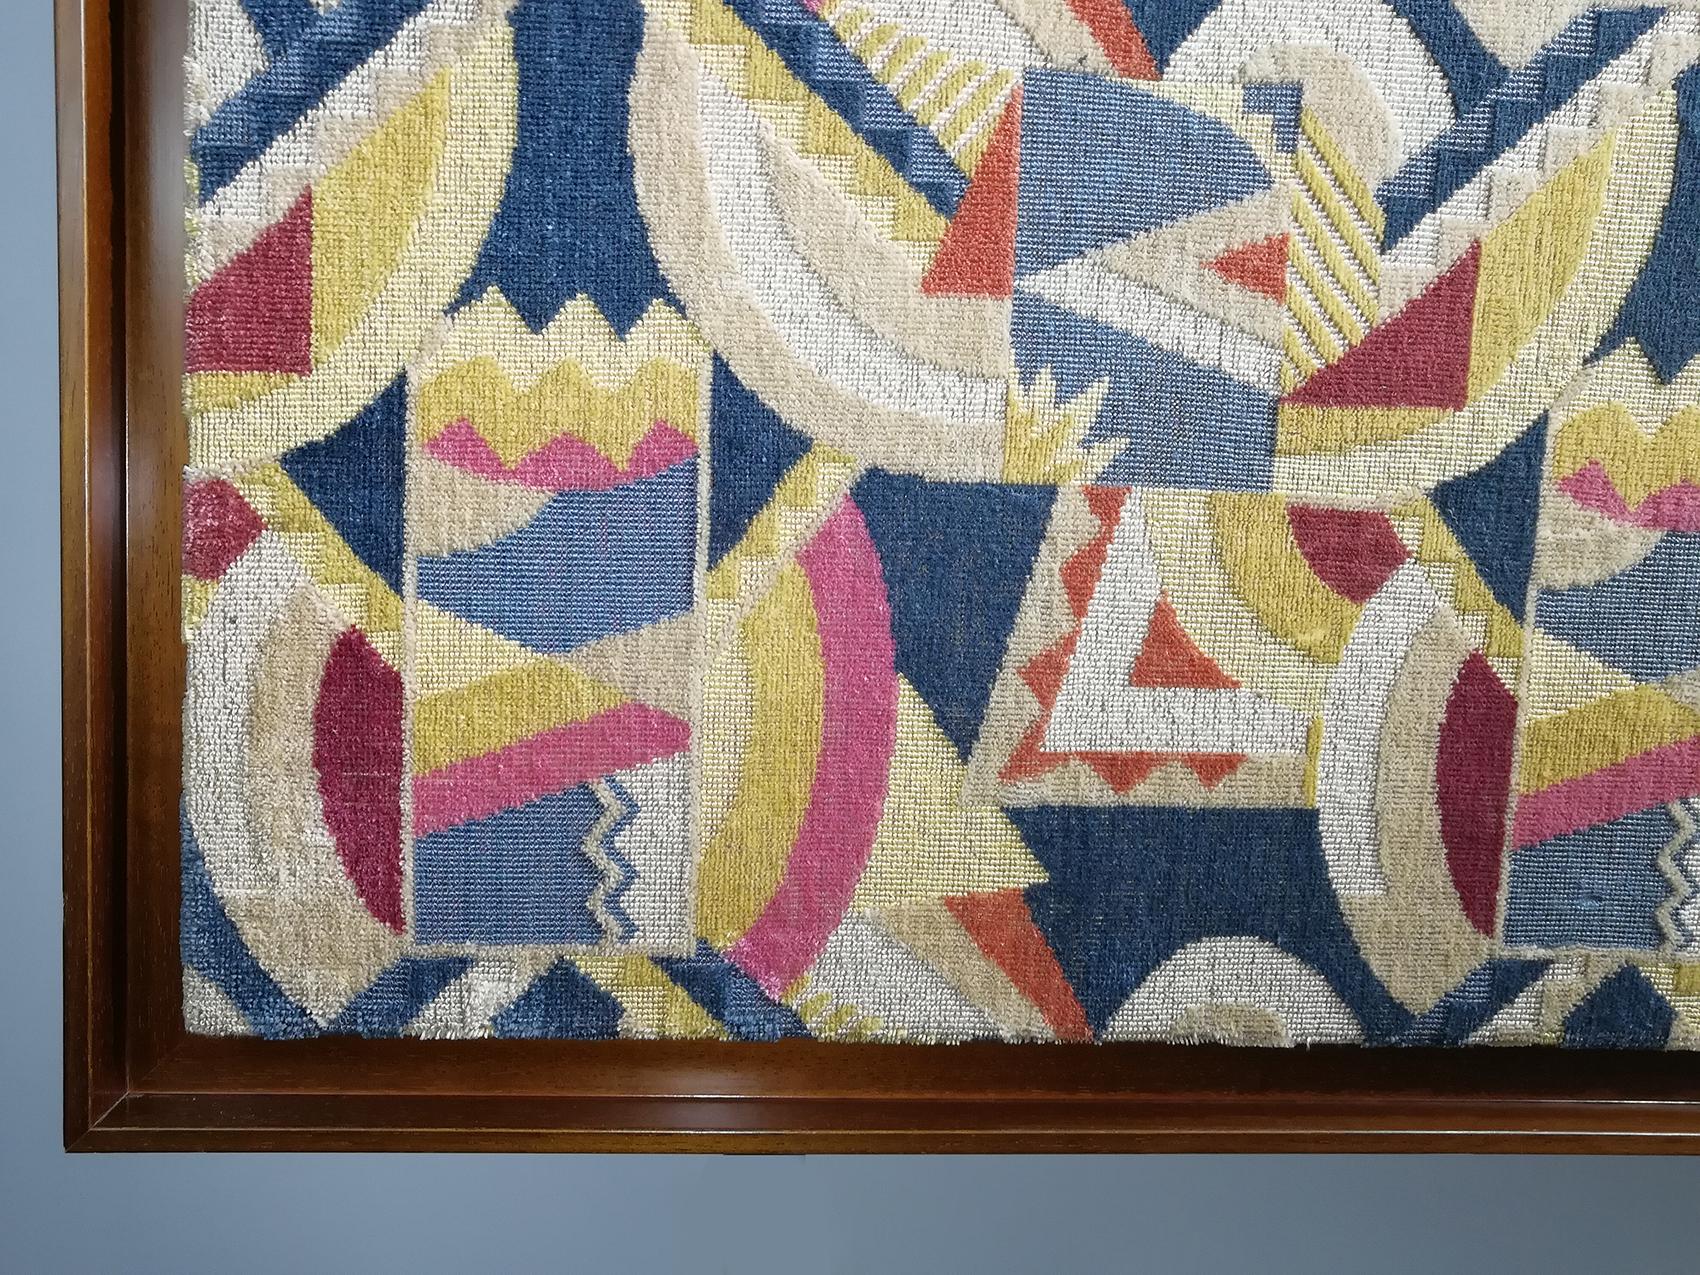 Decorative panel in wool fabric delivered with oak frame.
Typical Art Deco abstract design attributed to Walter Gropius (Architect: early 20th century).
Walter Gropius (1883-1969) was a German architect and founder of the Bauhaus School, who,